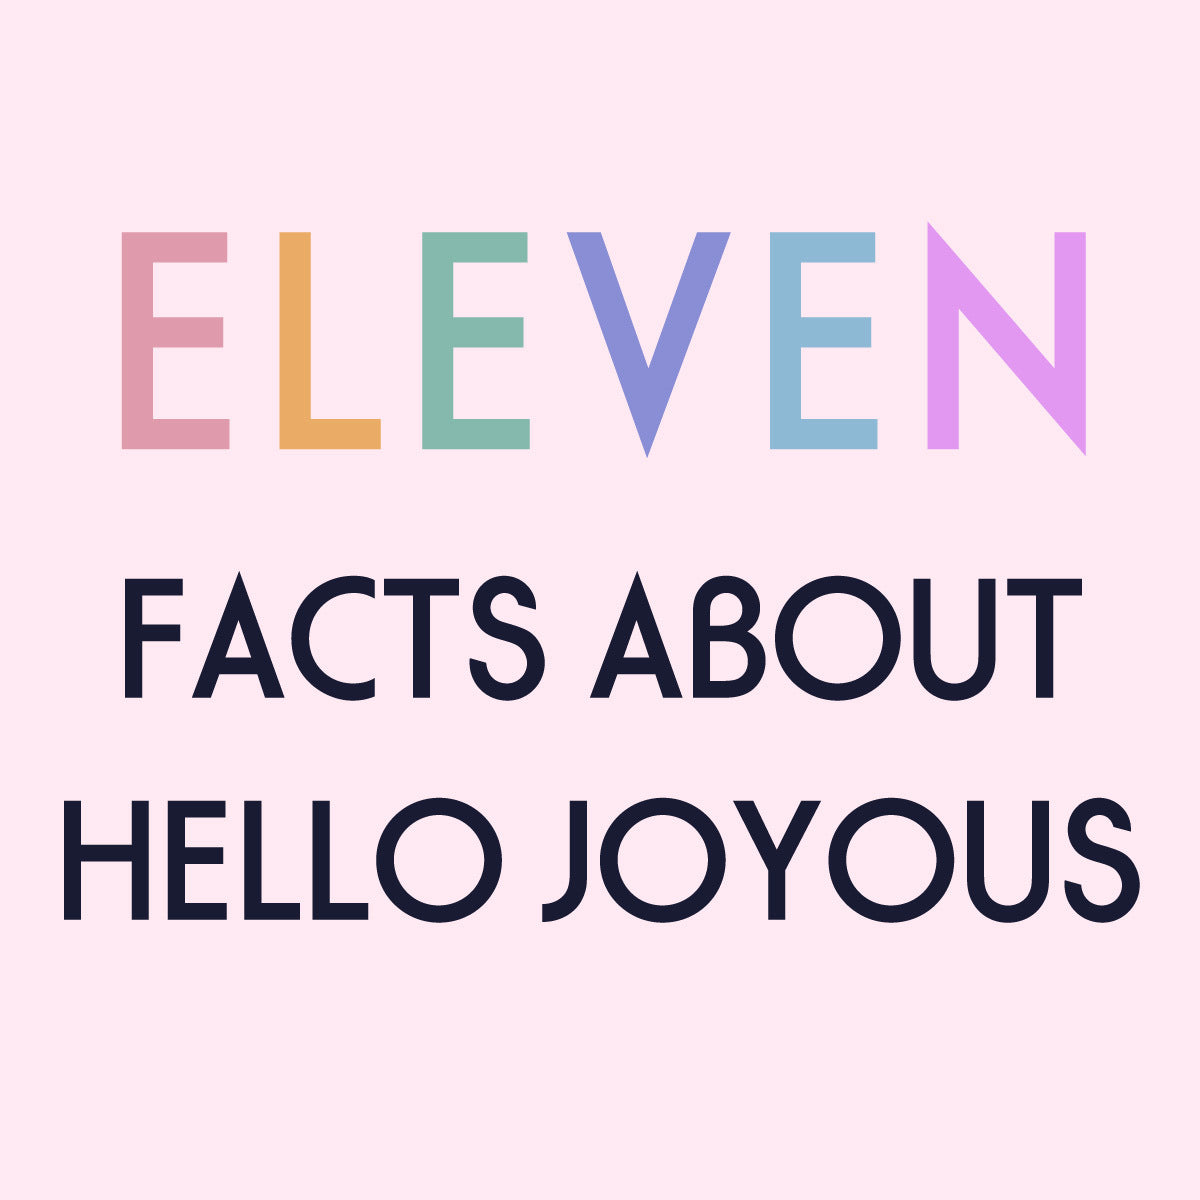 11 Facts About Hello Joyous